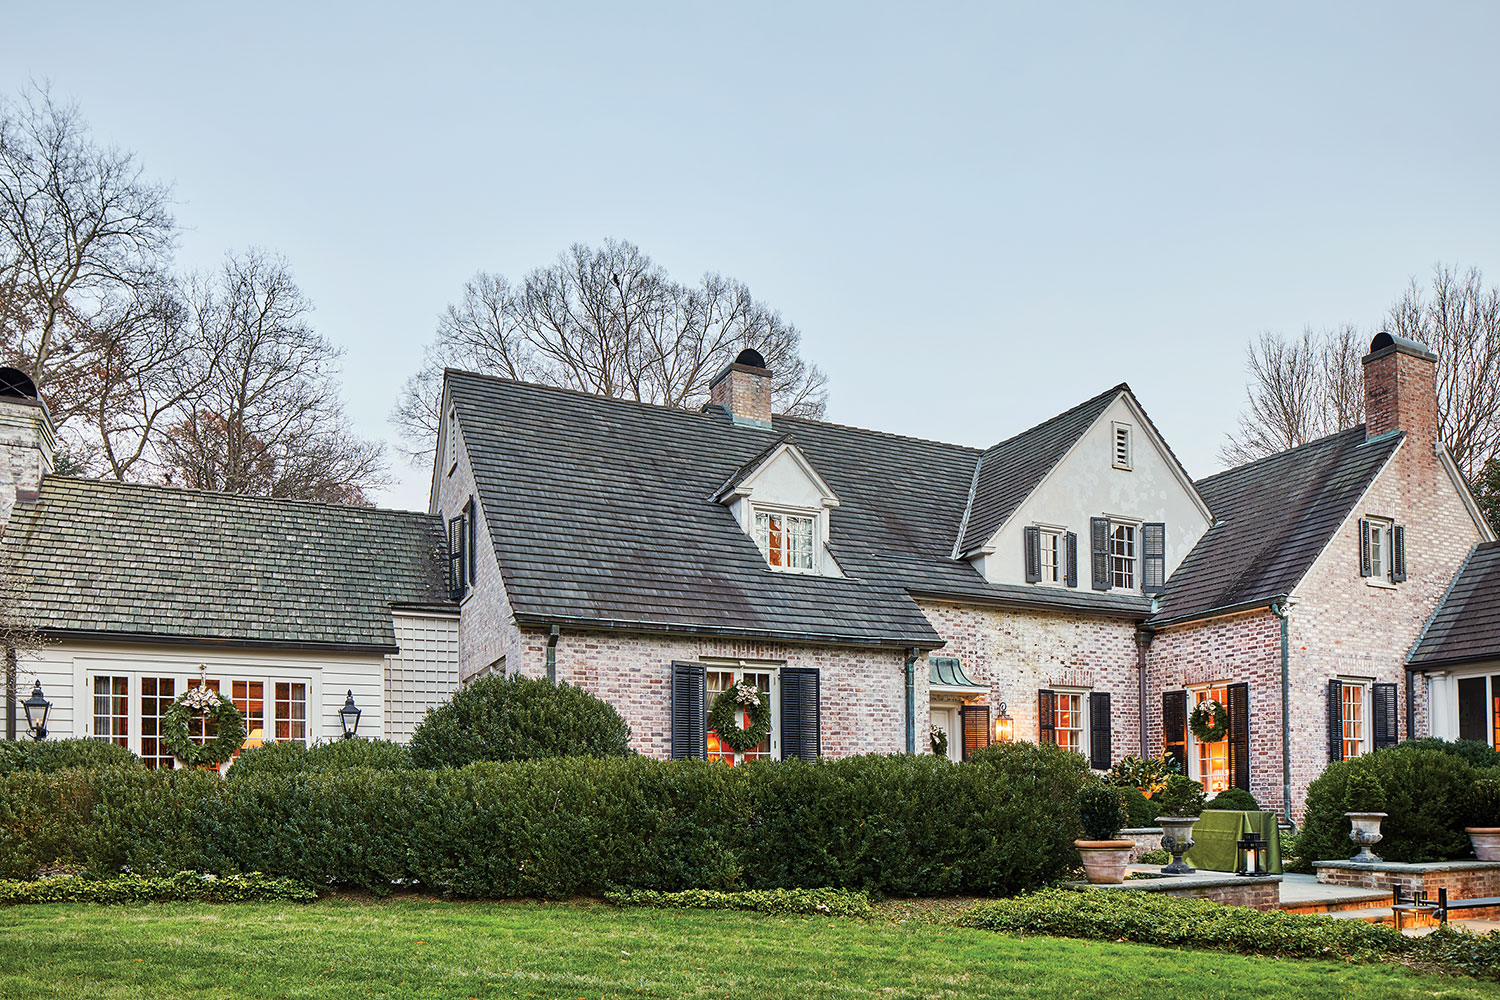 1920s Colonial-style cottage with limewashed brick exterior